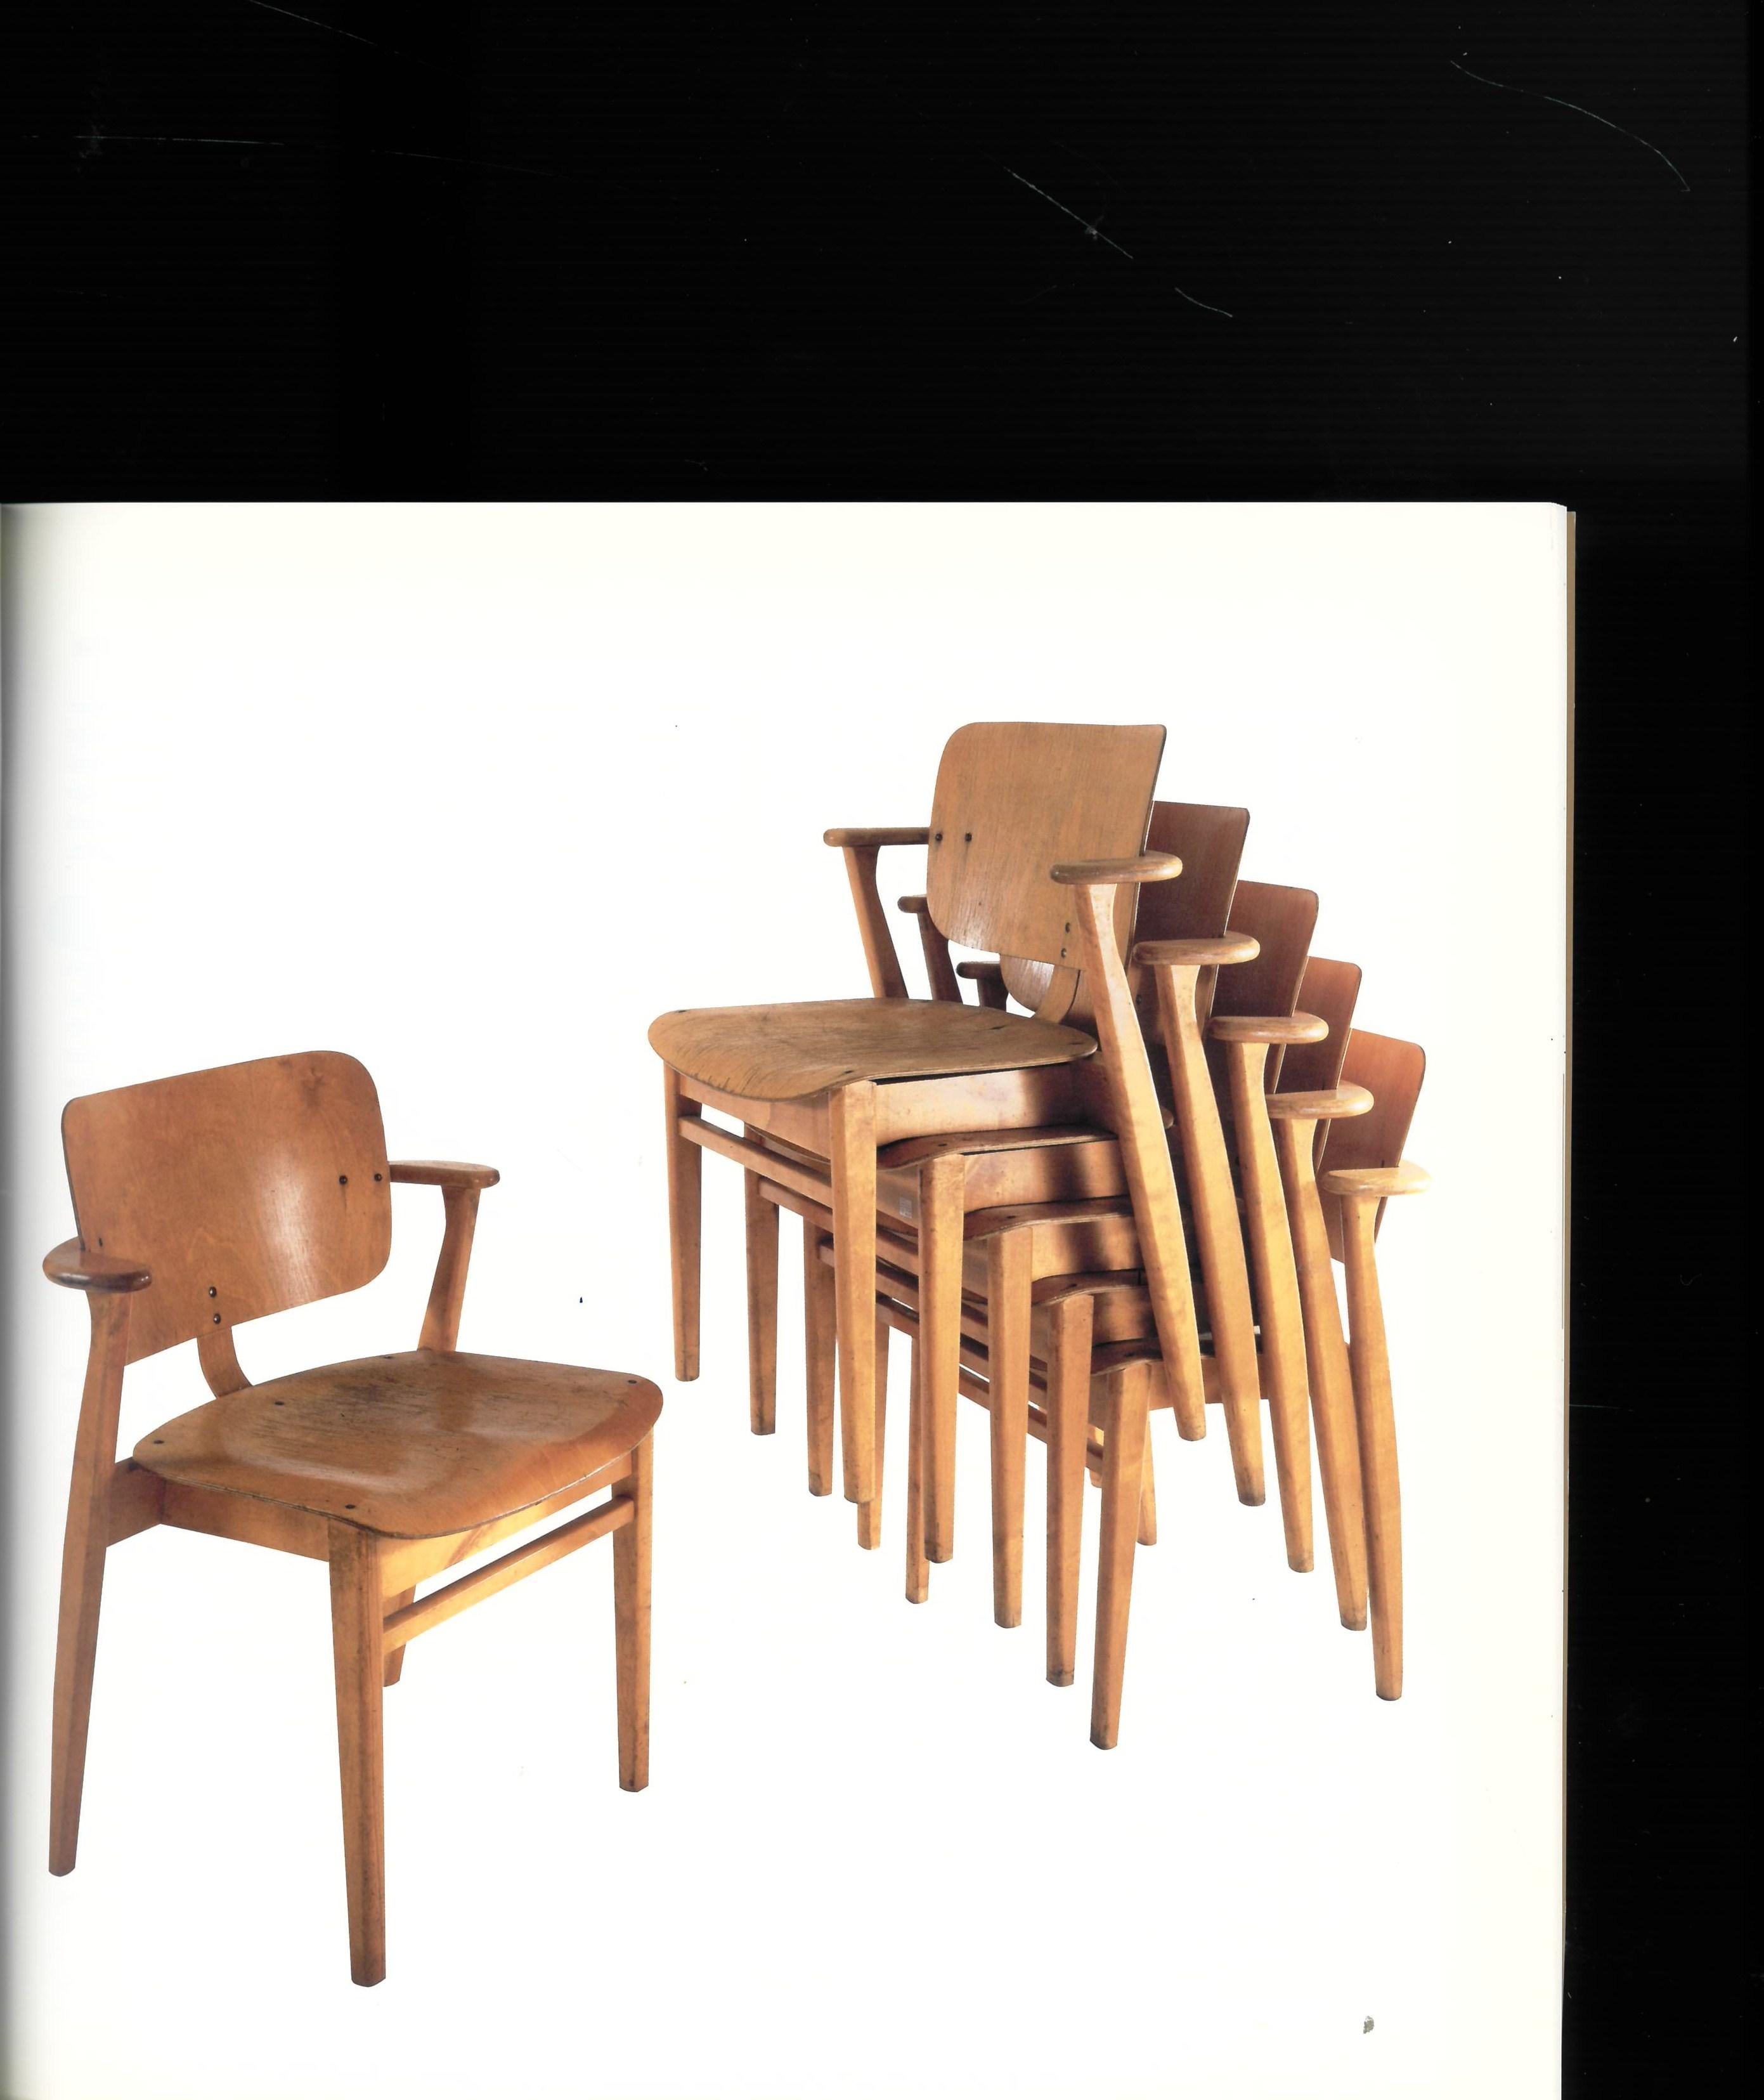 This catalogue relates to an exhibition which took place in New York in 2001, on the work and furniture designs of Ilmari Tapiovaara, who in the mid twentieth century - 1940s and 1950s was one of Finland's most famous designers, best known for his